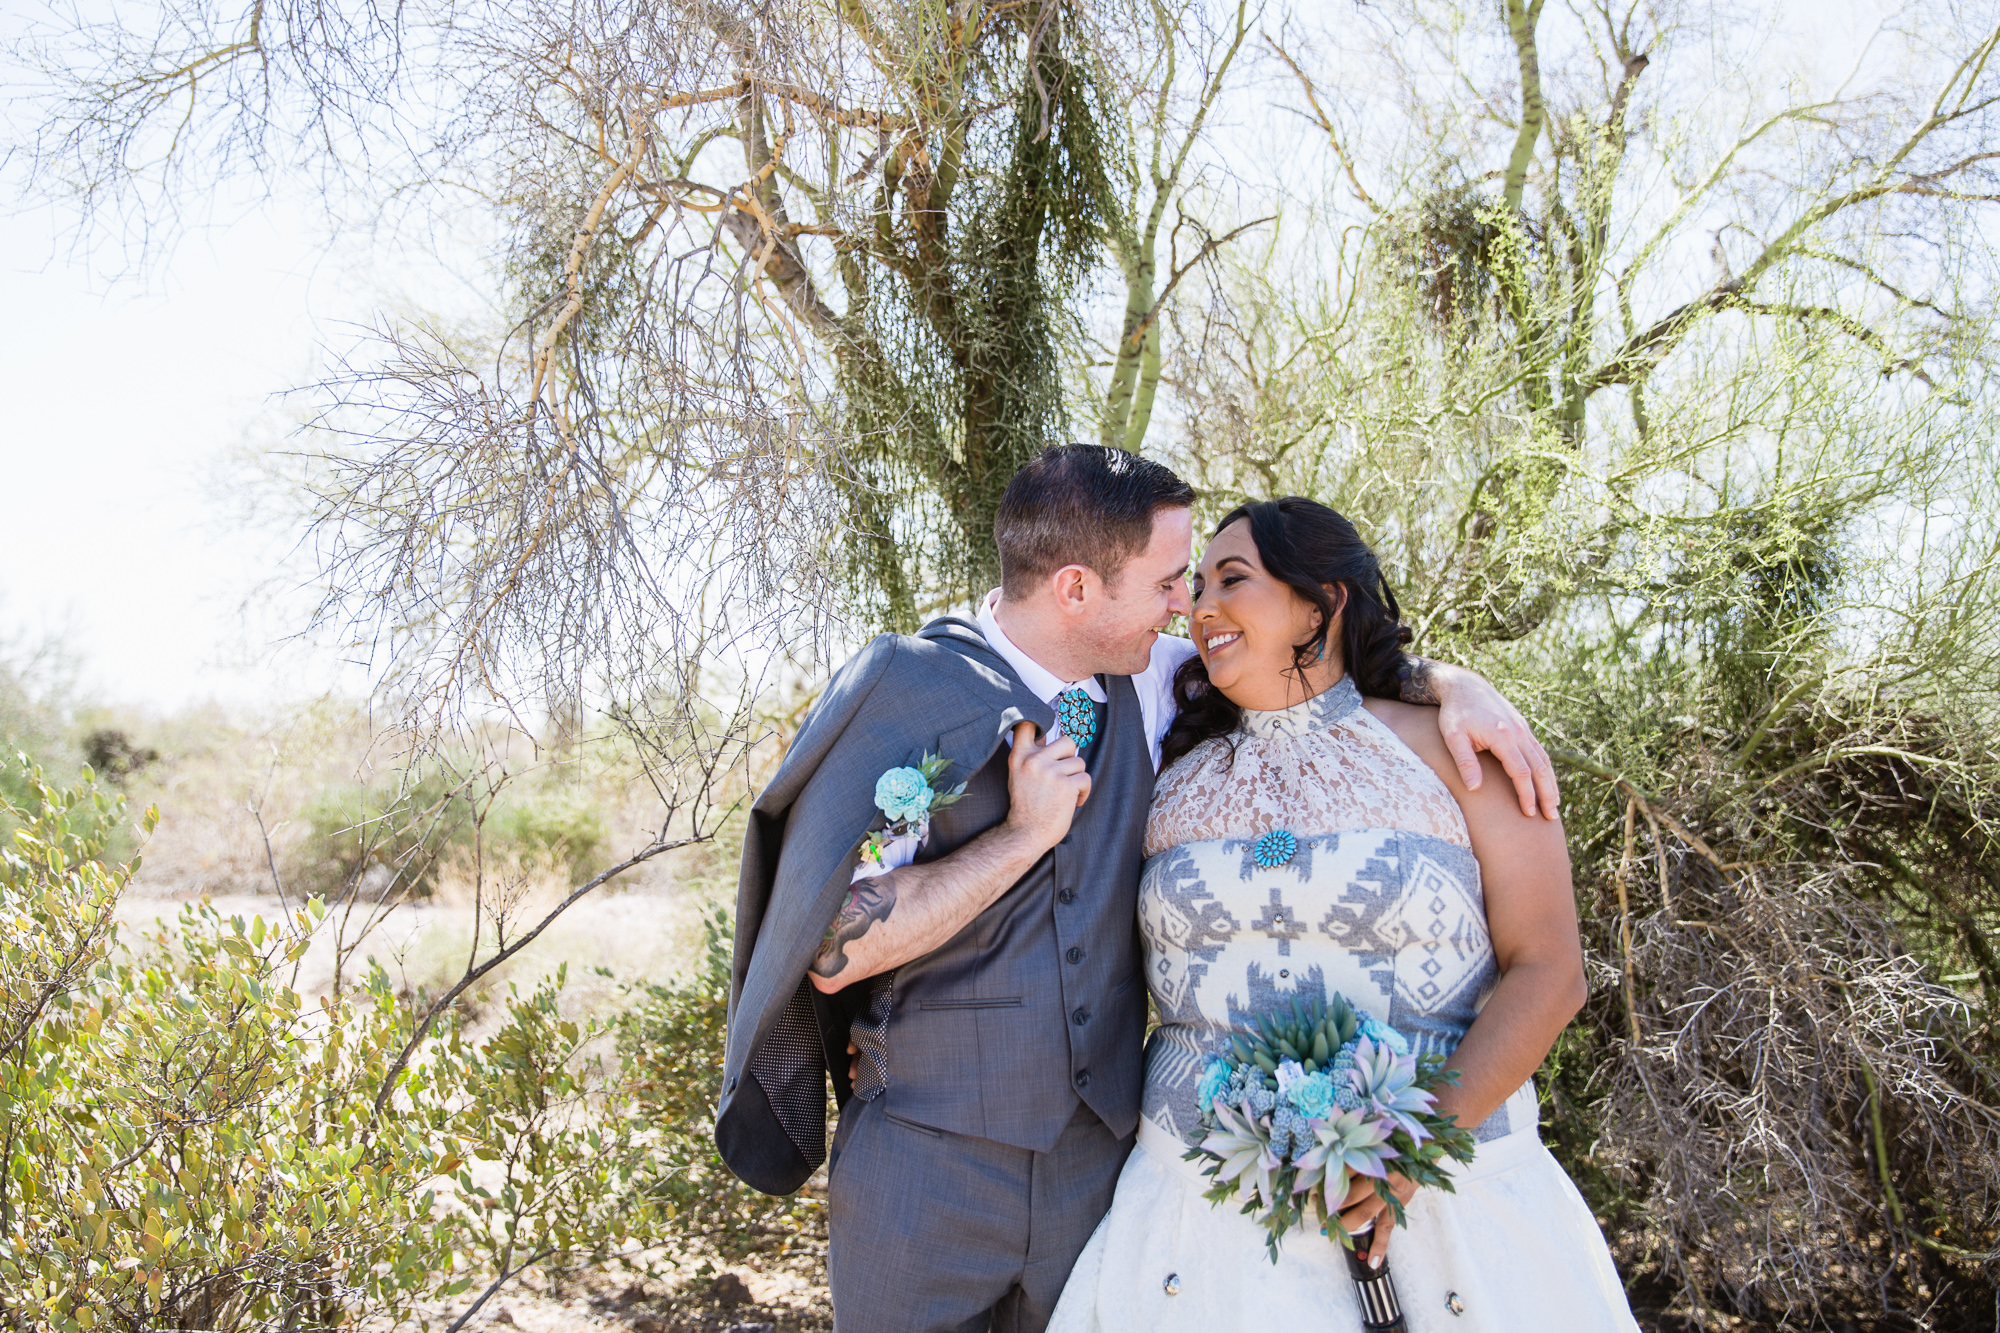 Tattooed and Irish groom and Navajo bride in a native inspired wedding dress share a laugh at their Lost Dutchman State Park Turquoise Star Wars wedding by Phoenix wedding photographers PMA Photography.